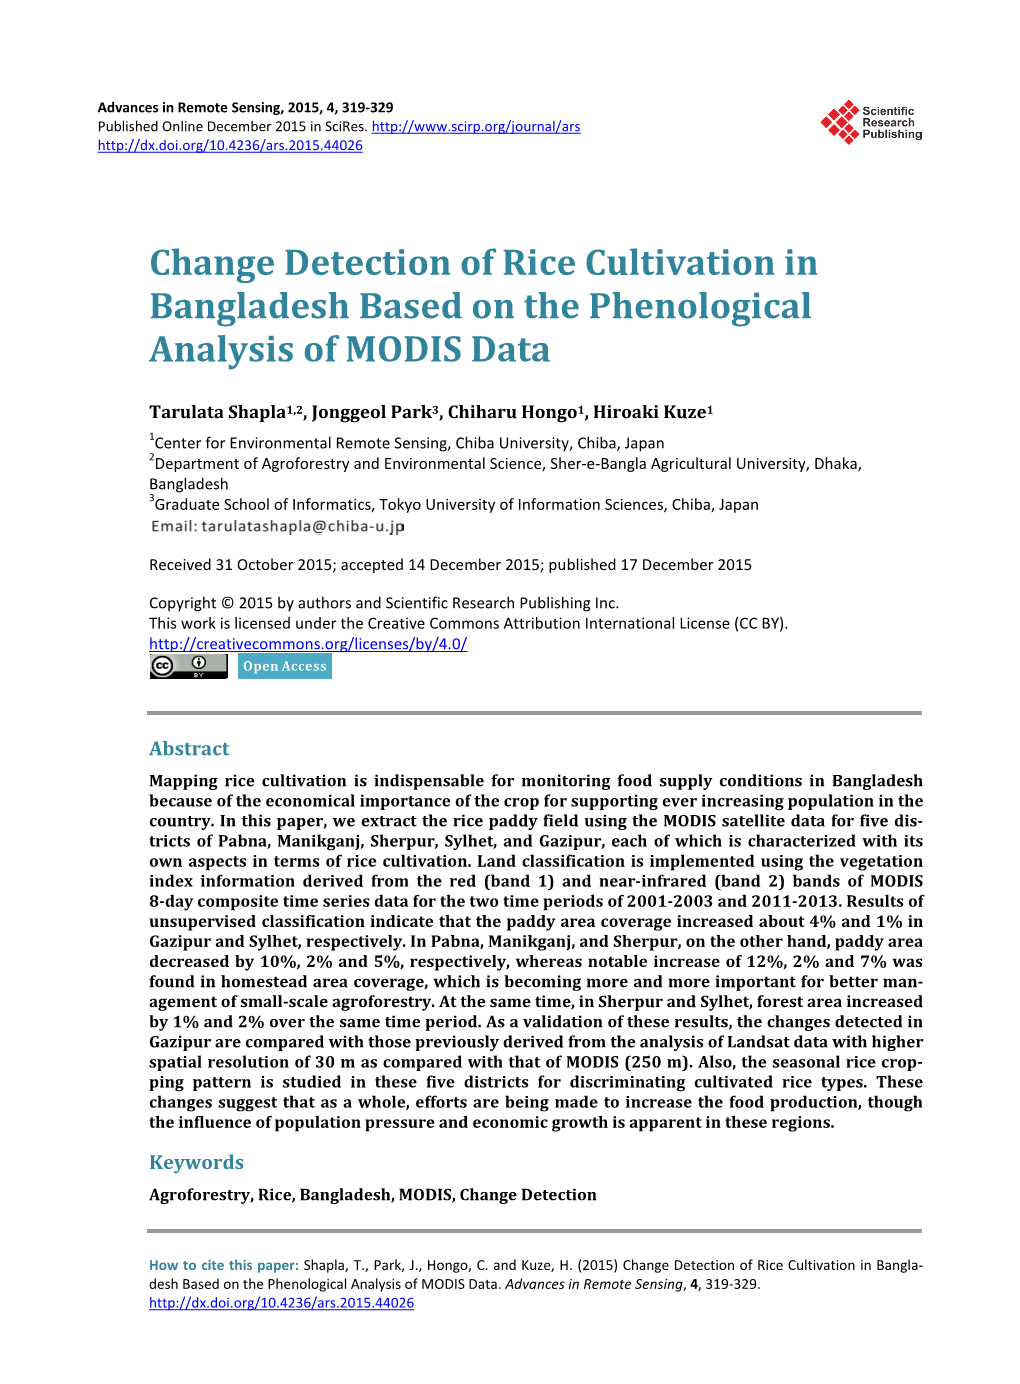 Change Detection of Rice Cultivation in Bangladesh Based on the Phenological Analysis of MODIS Data